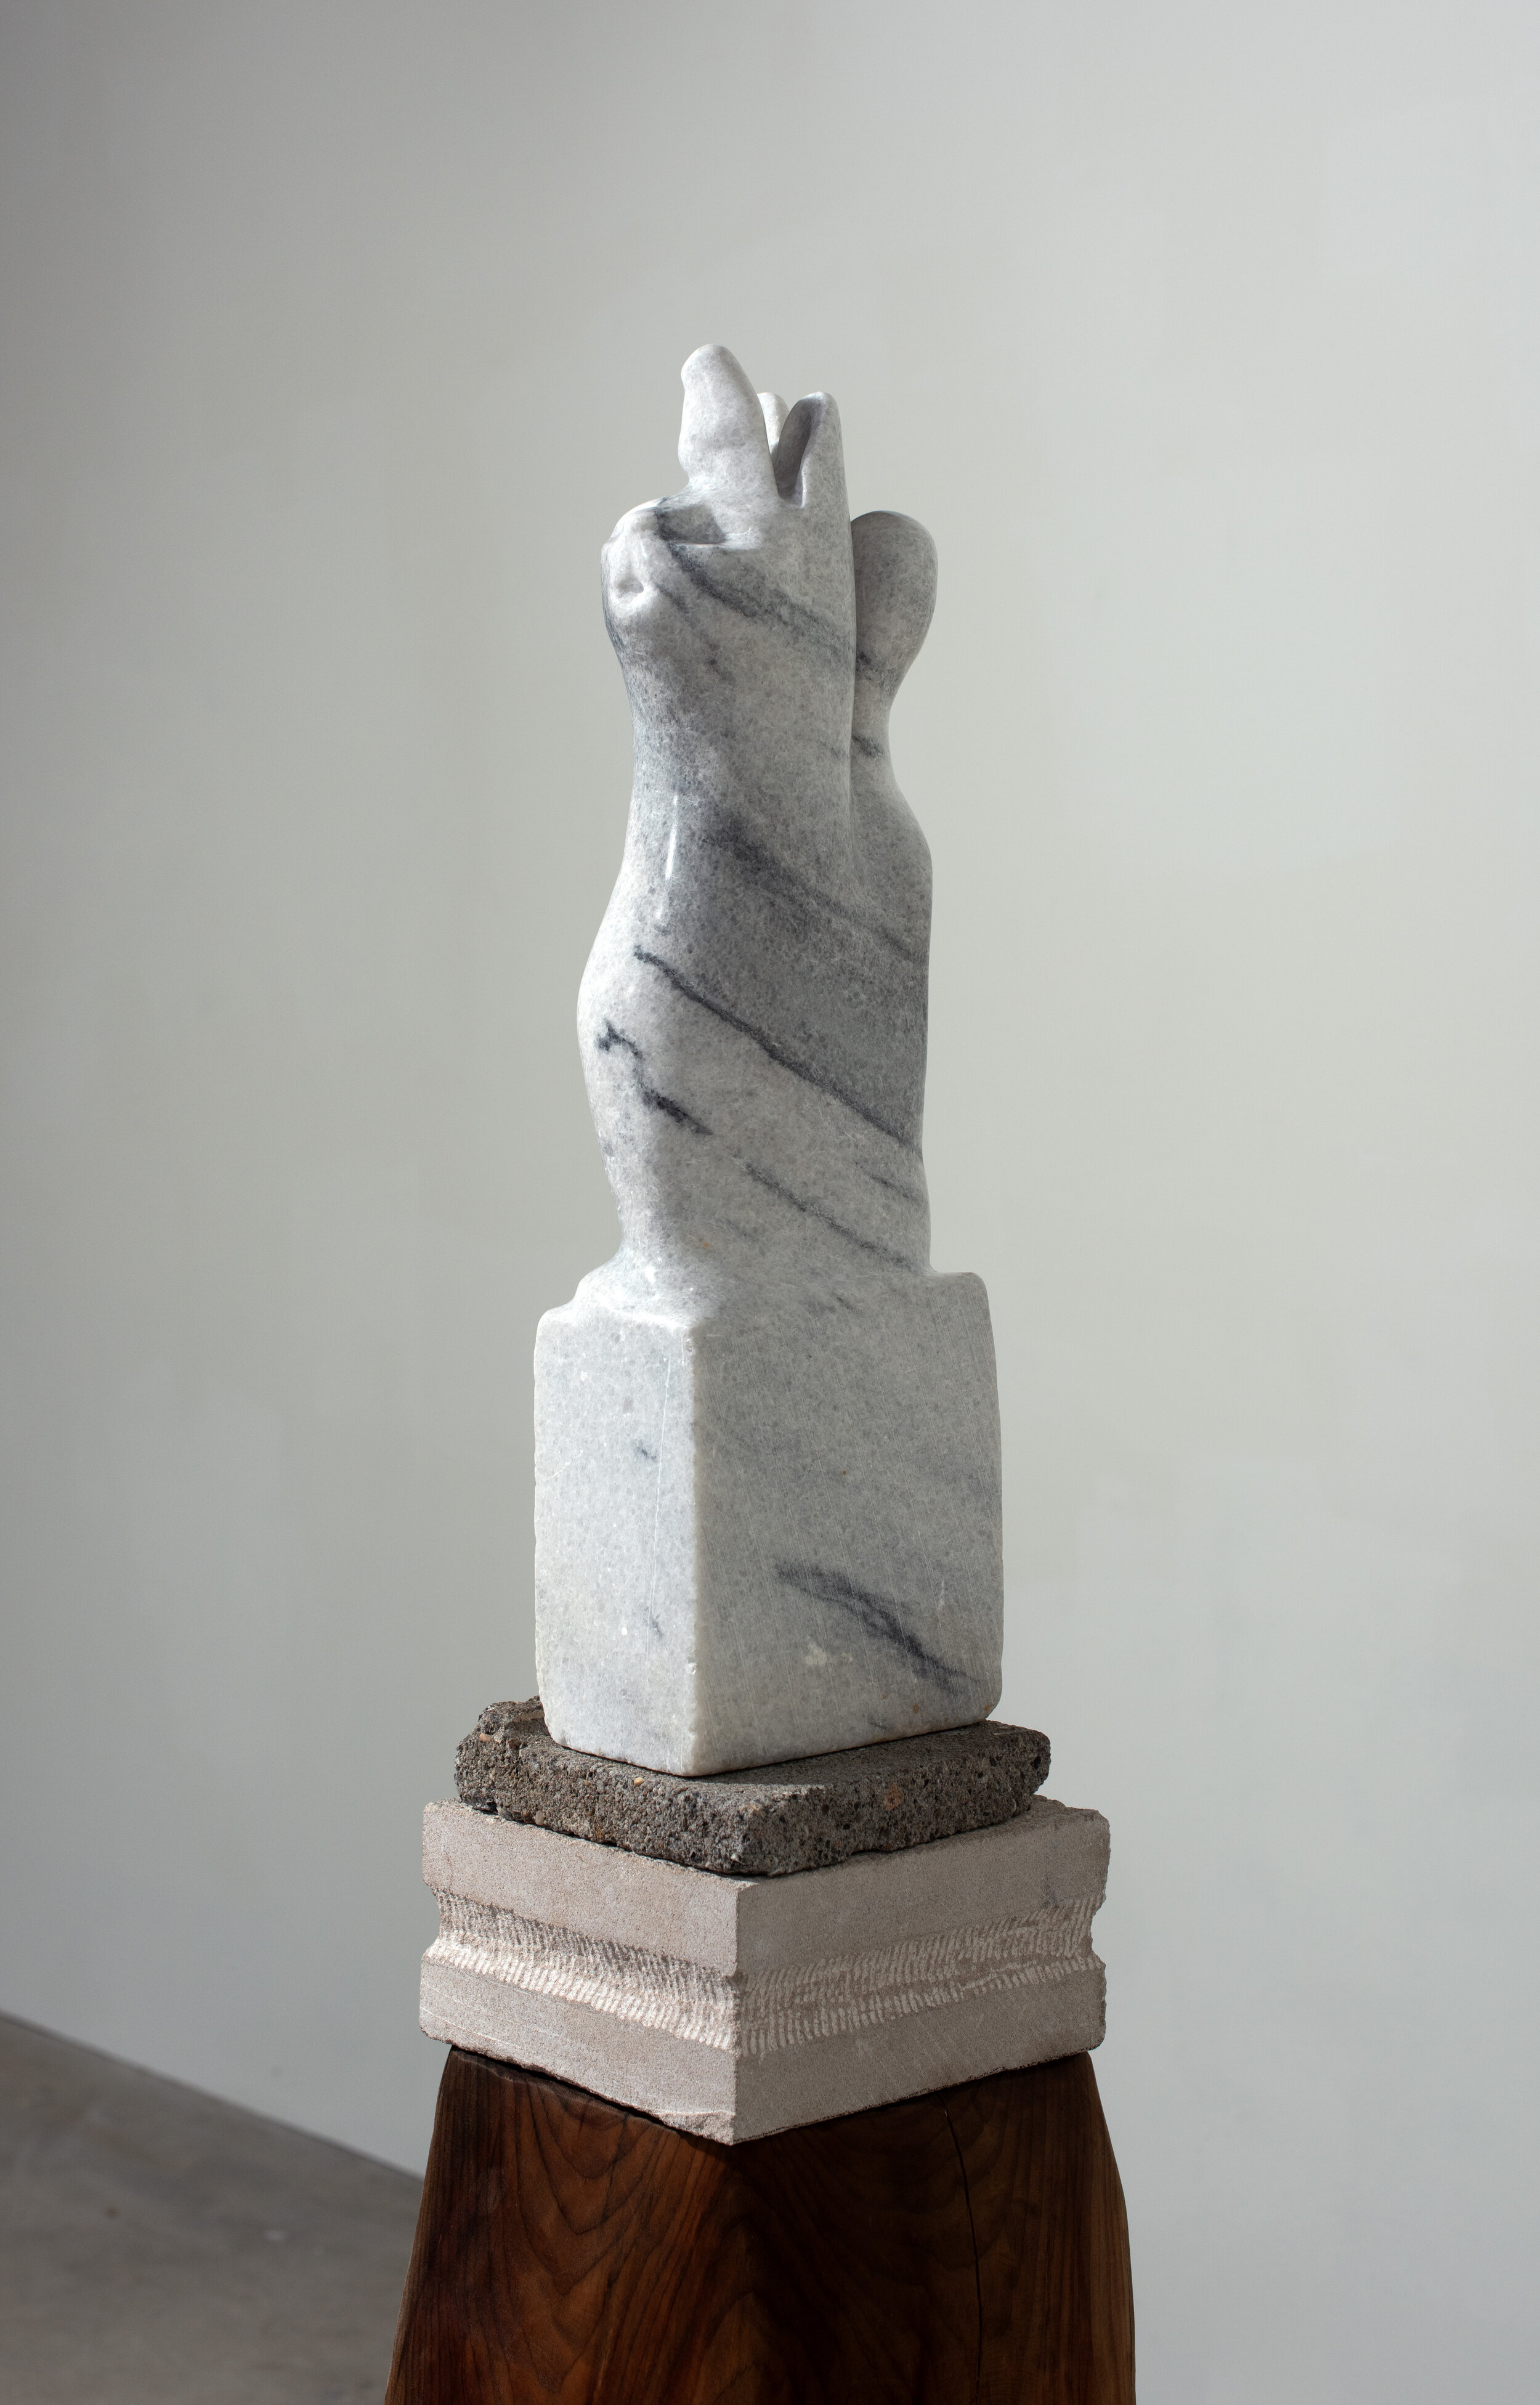   Singing Cat  (detail), 2020 Wood, marble, limestone, and concrete 63 1/2 x 10 x 10 inches 